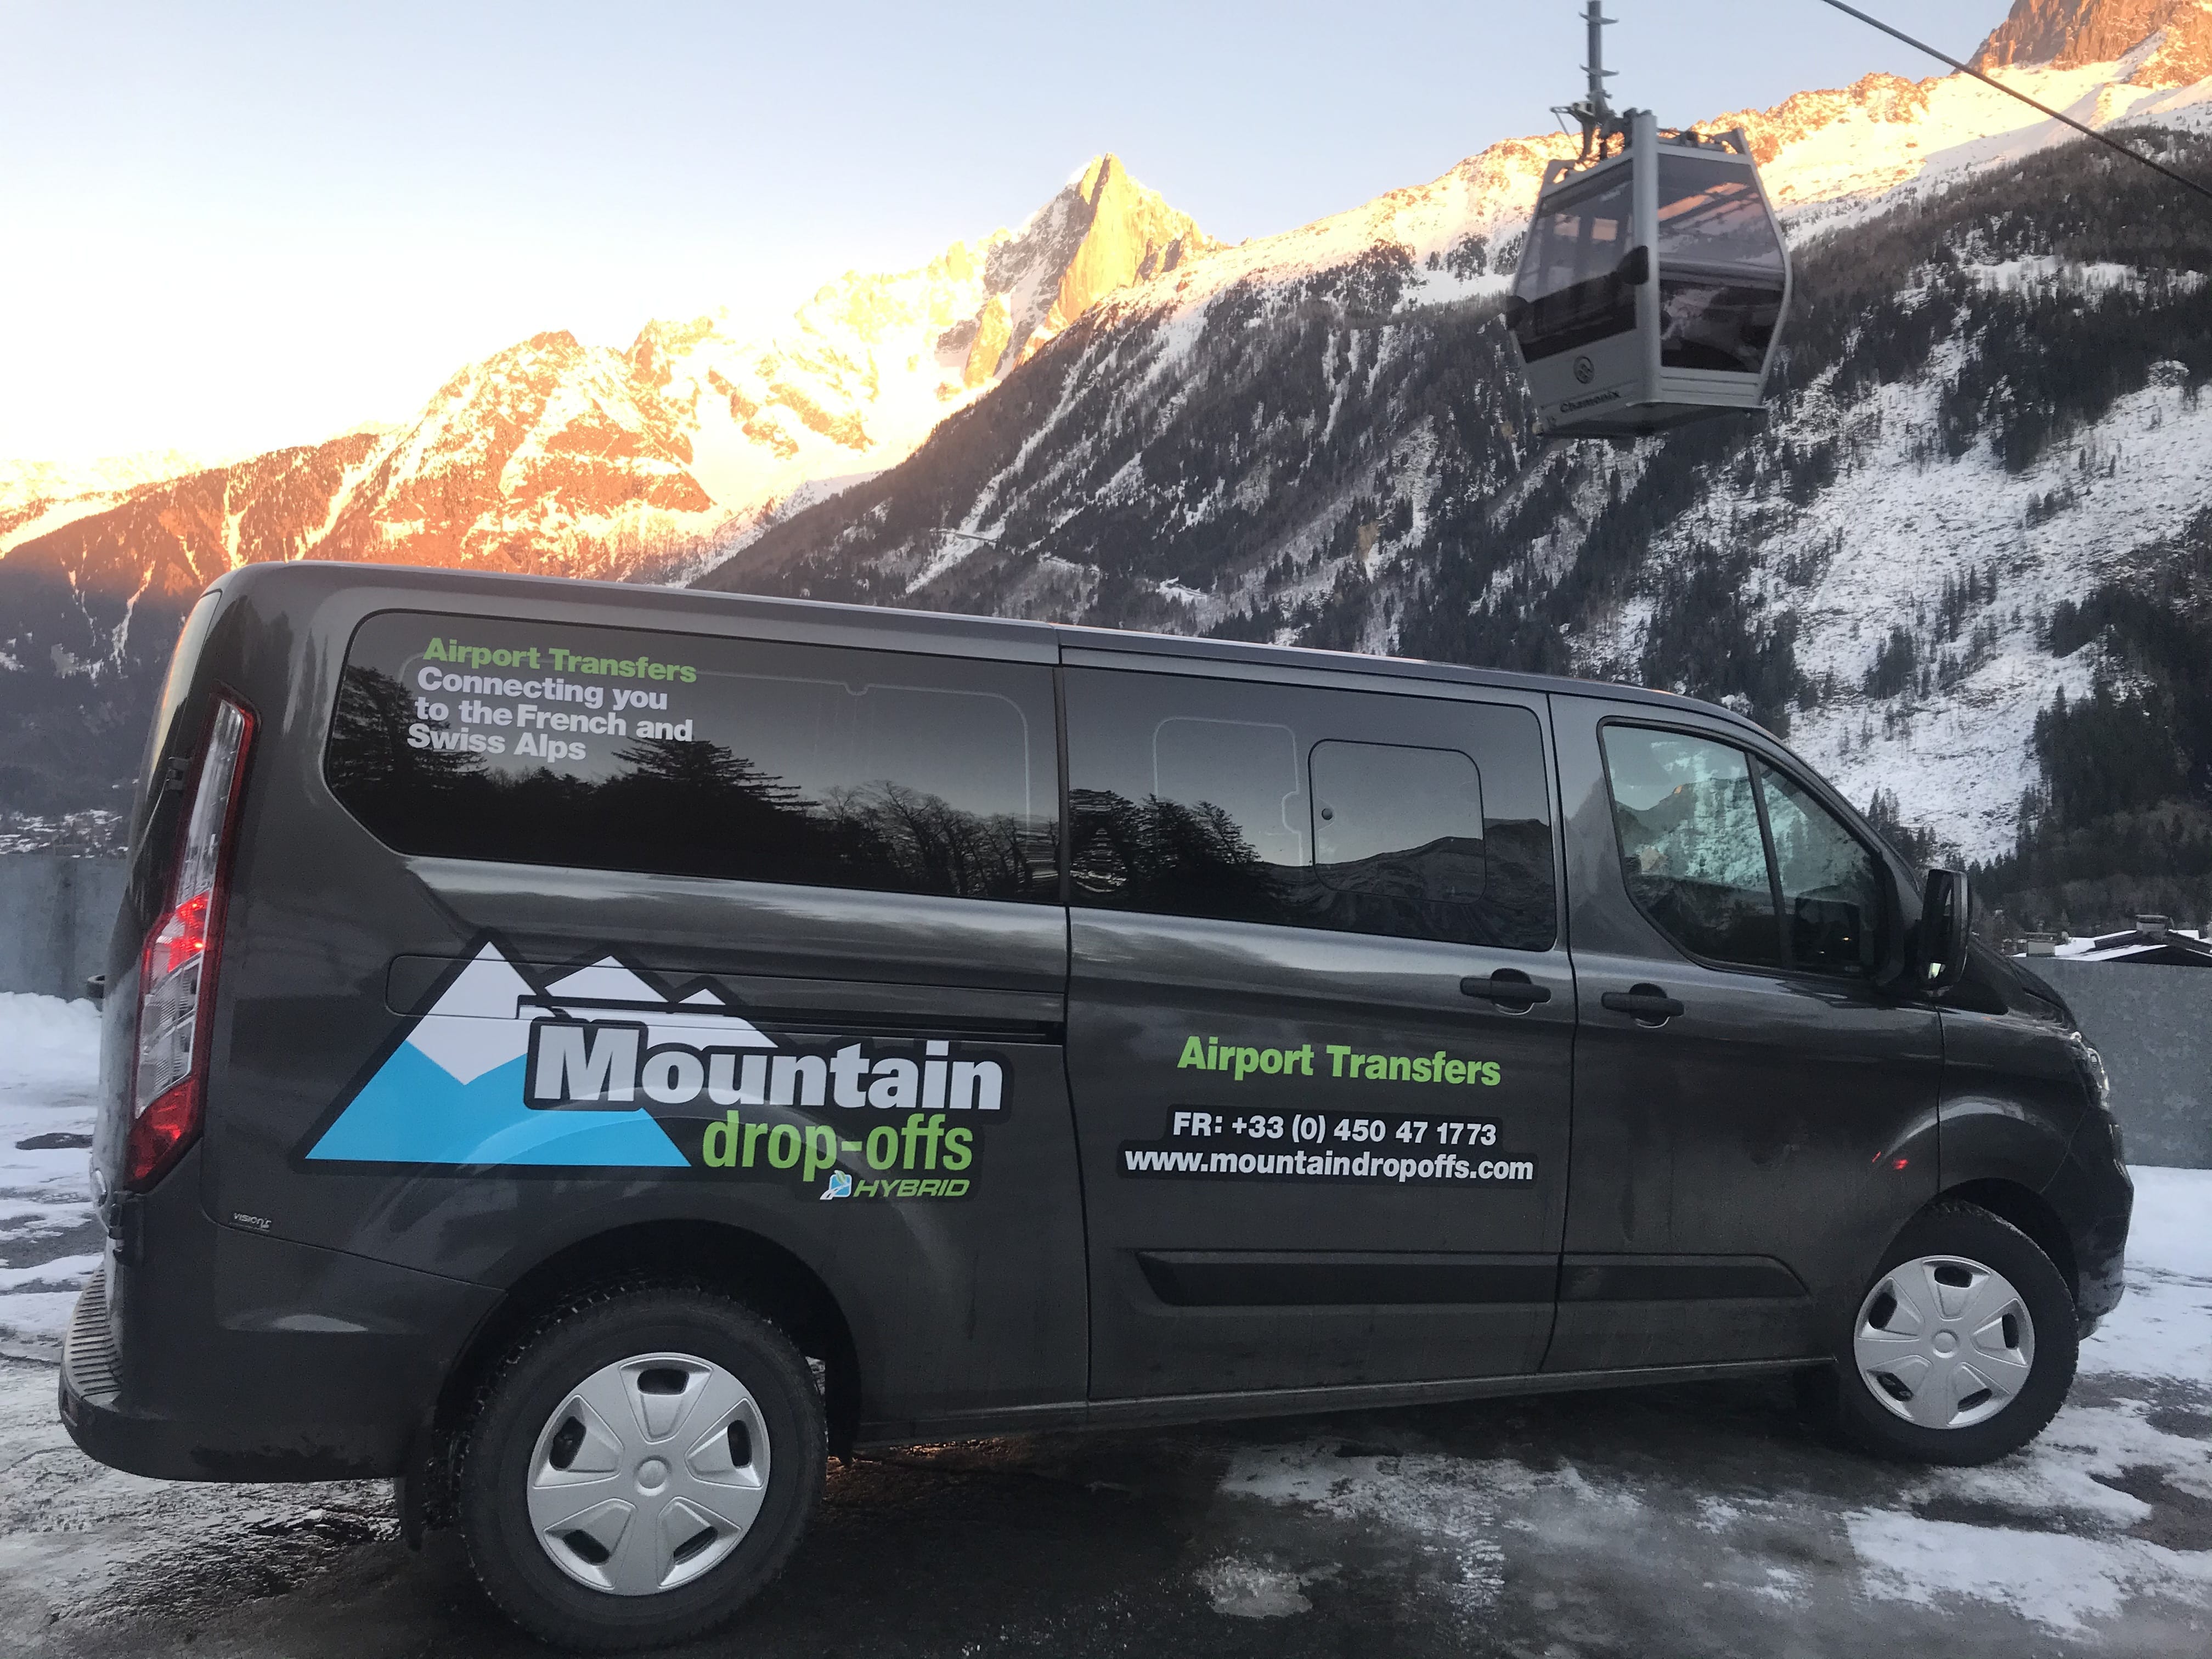 Chamonix transfer hybrid transfer vehicle in front of mountains